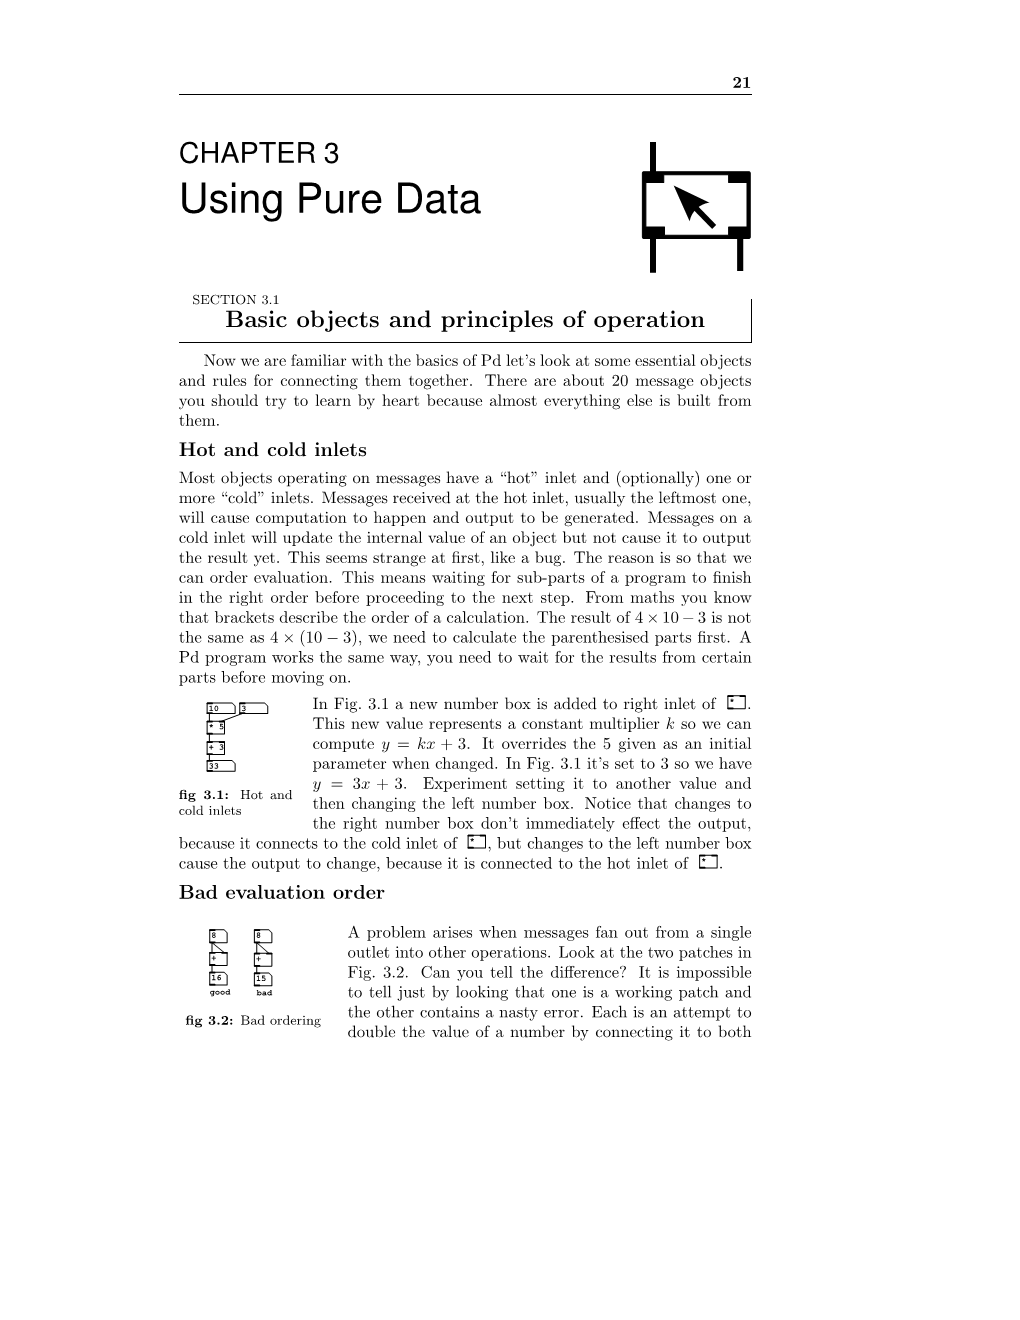 CHAPTER 3 Using Pure Data